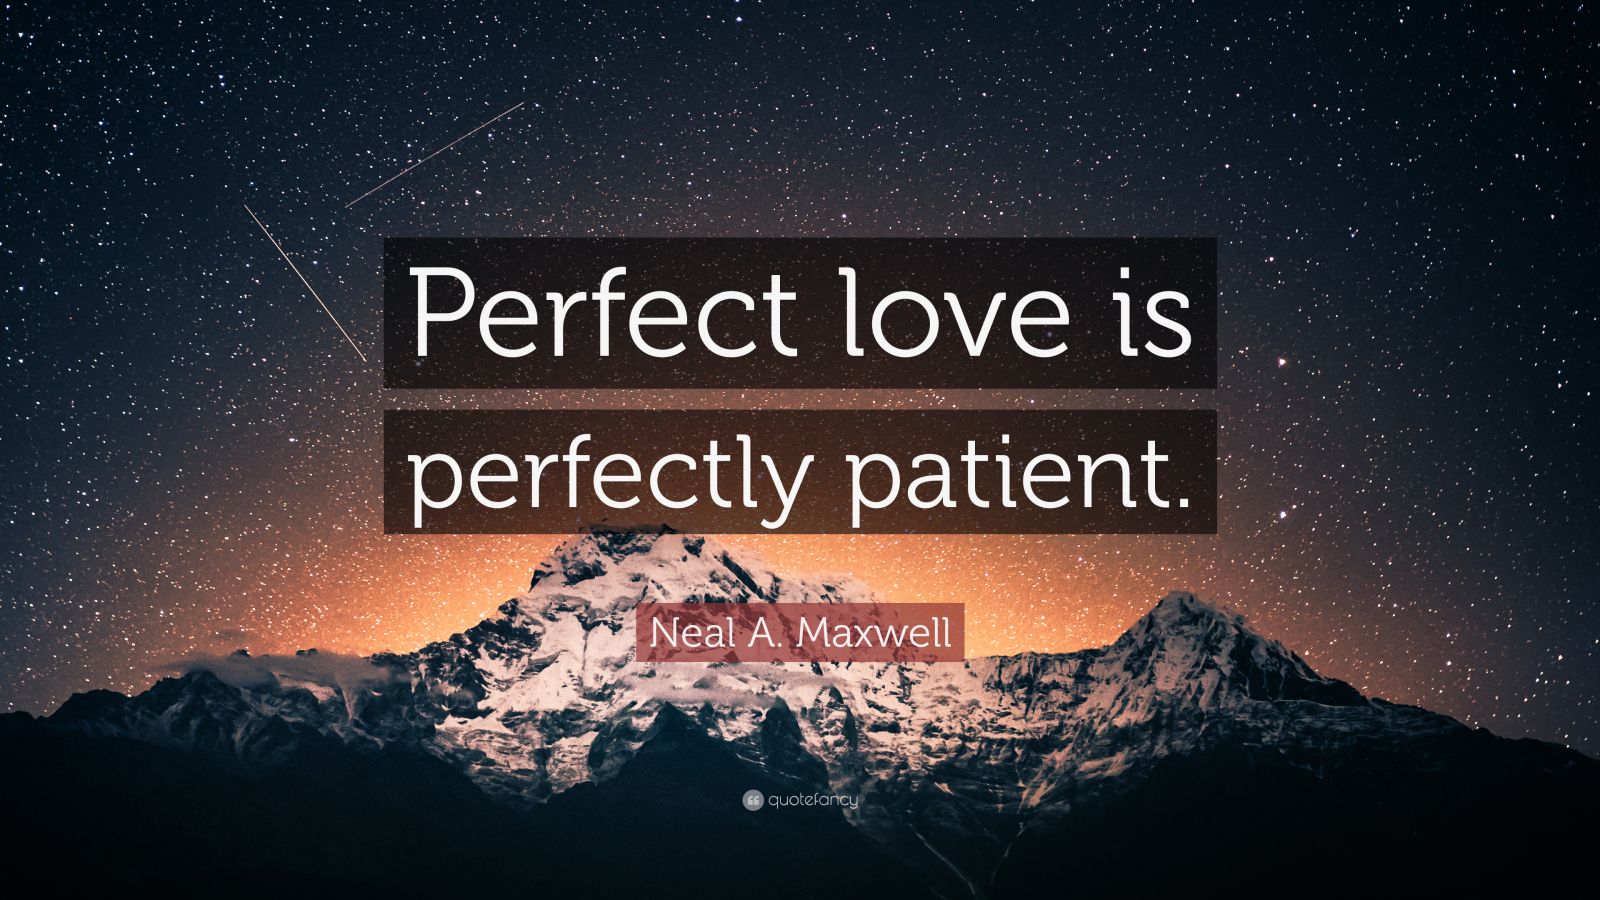 Neal A. Maxwell Quote: “Perfect love is perfectly patient.” (12 ...